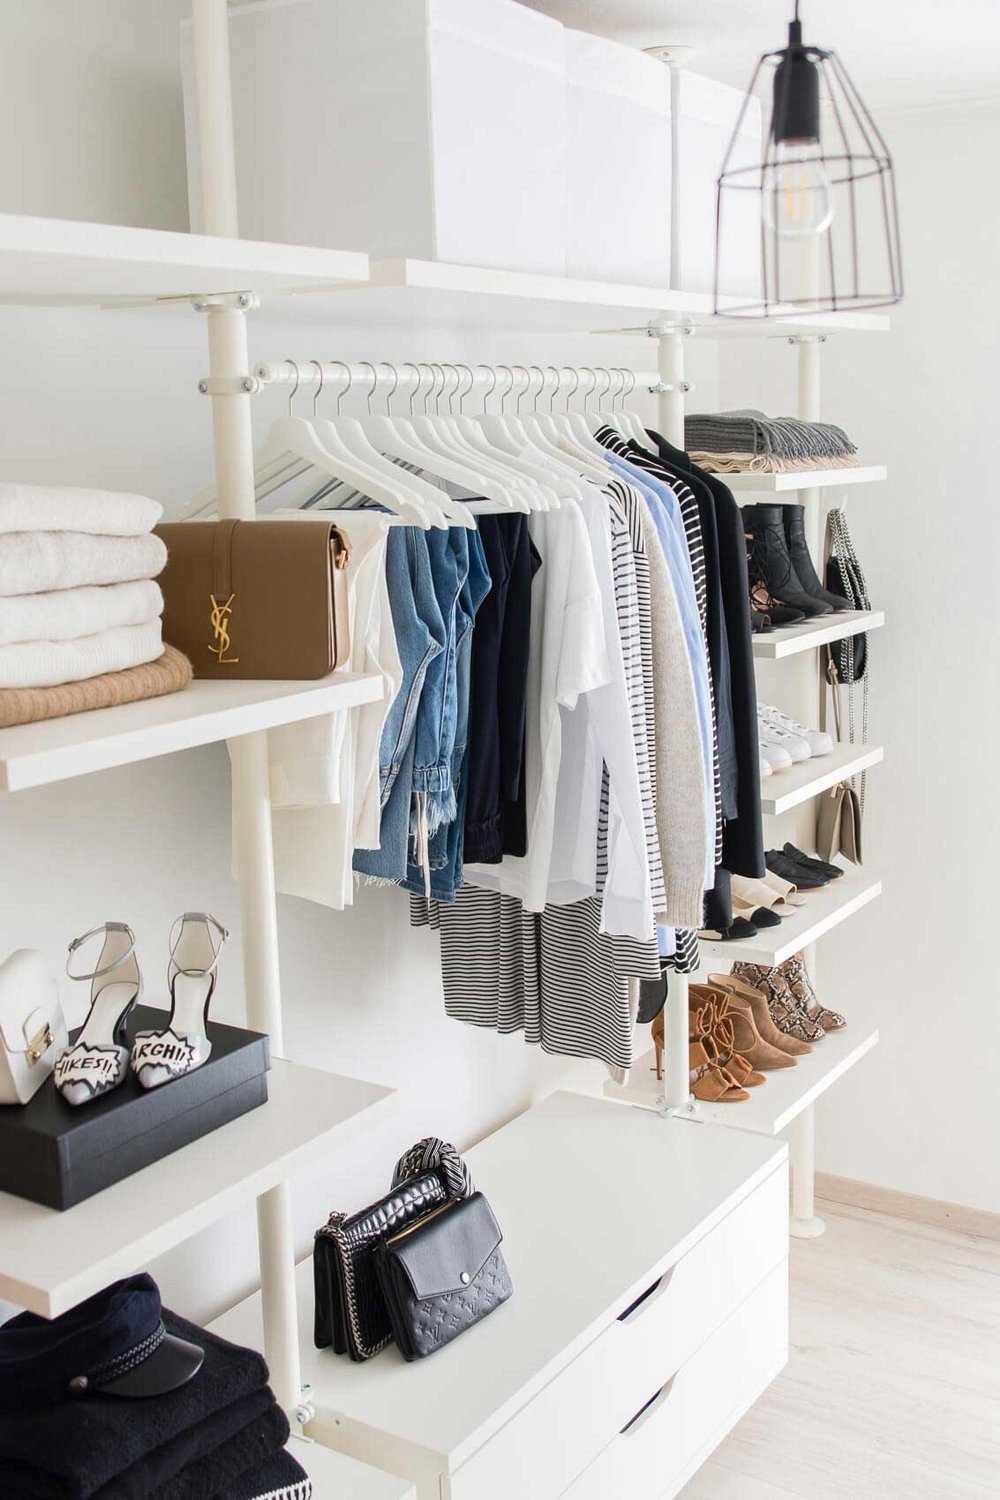 how-to-organize-your-clothes-wardrobe-storage-shelves-handbags-shoes-folded-cleanout-closet-system-white.jpg